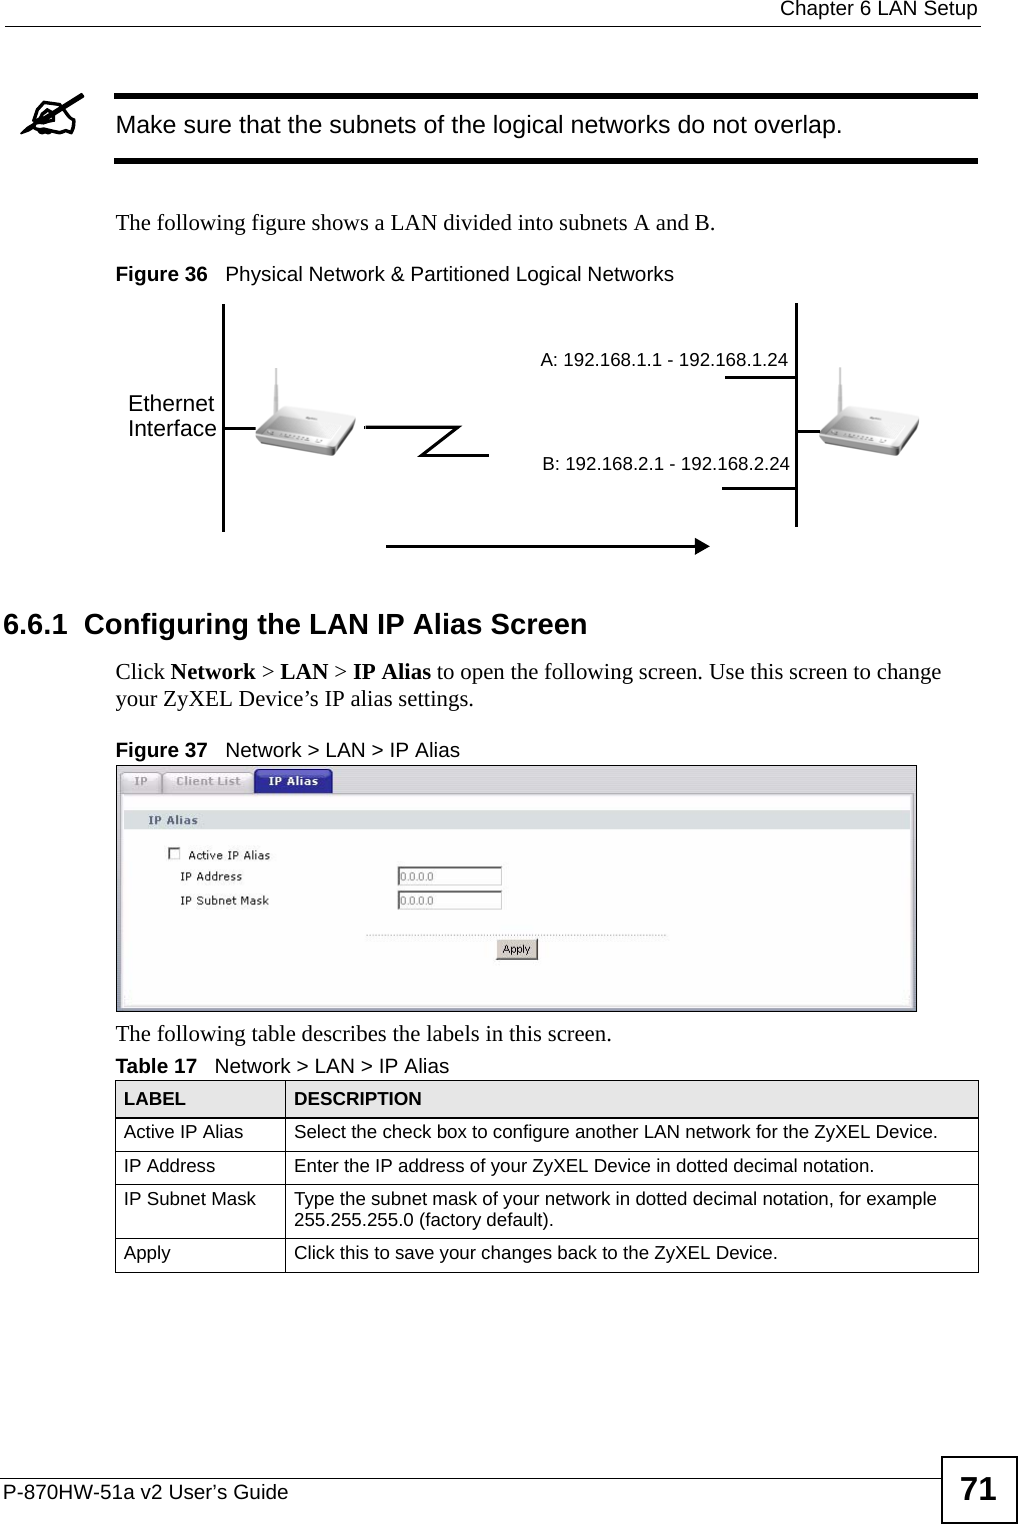  Chapter 6 LAN SetupP-870HW-51a v2 User’s Guide 71&quot;Make sure that the subnets of the logical networks do not overlap.The following figure shows a LAN divided into subnets A and B.Figure 36   Physical Network &amp; Partitioned Logical Networks6.6.1  Configuring the LAN IP Alias ScreenClick Network &gt; LAN &gt; IP Alias to open the following screen. Use this screen to change your ZyXEL Device’s IP alias settings.Figure 37   Network &gt; LAN &gt; IP AliasThe following table describes the labels in this screen. EthernetInterfaceA: 192.168.1.1 - 192.168.1.24B: 192.168.2.1 - 192.168.2.24Table 17   Network &gt; LAN &gt; IP Alias LABEL DESCRIPTIONActive IP Alias  Select the check box to configure another LAN network for the ZyXEL Device.IP Address Enter the IP address of your ZyXEL Device in dotted decimal notation. IP Subnet Mask Type the subnet mask of your network in dotted decimal notation, for example 255.255.255.0 (factory default).Apply Click this to save your changes back to the ZyXEL Device.